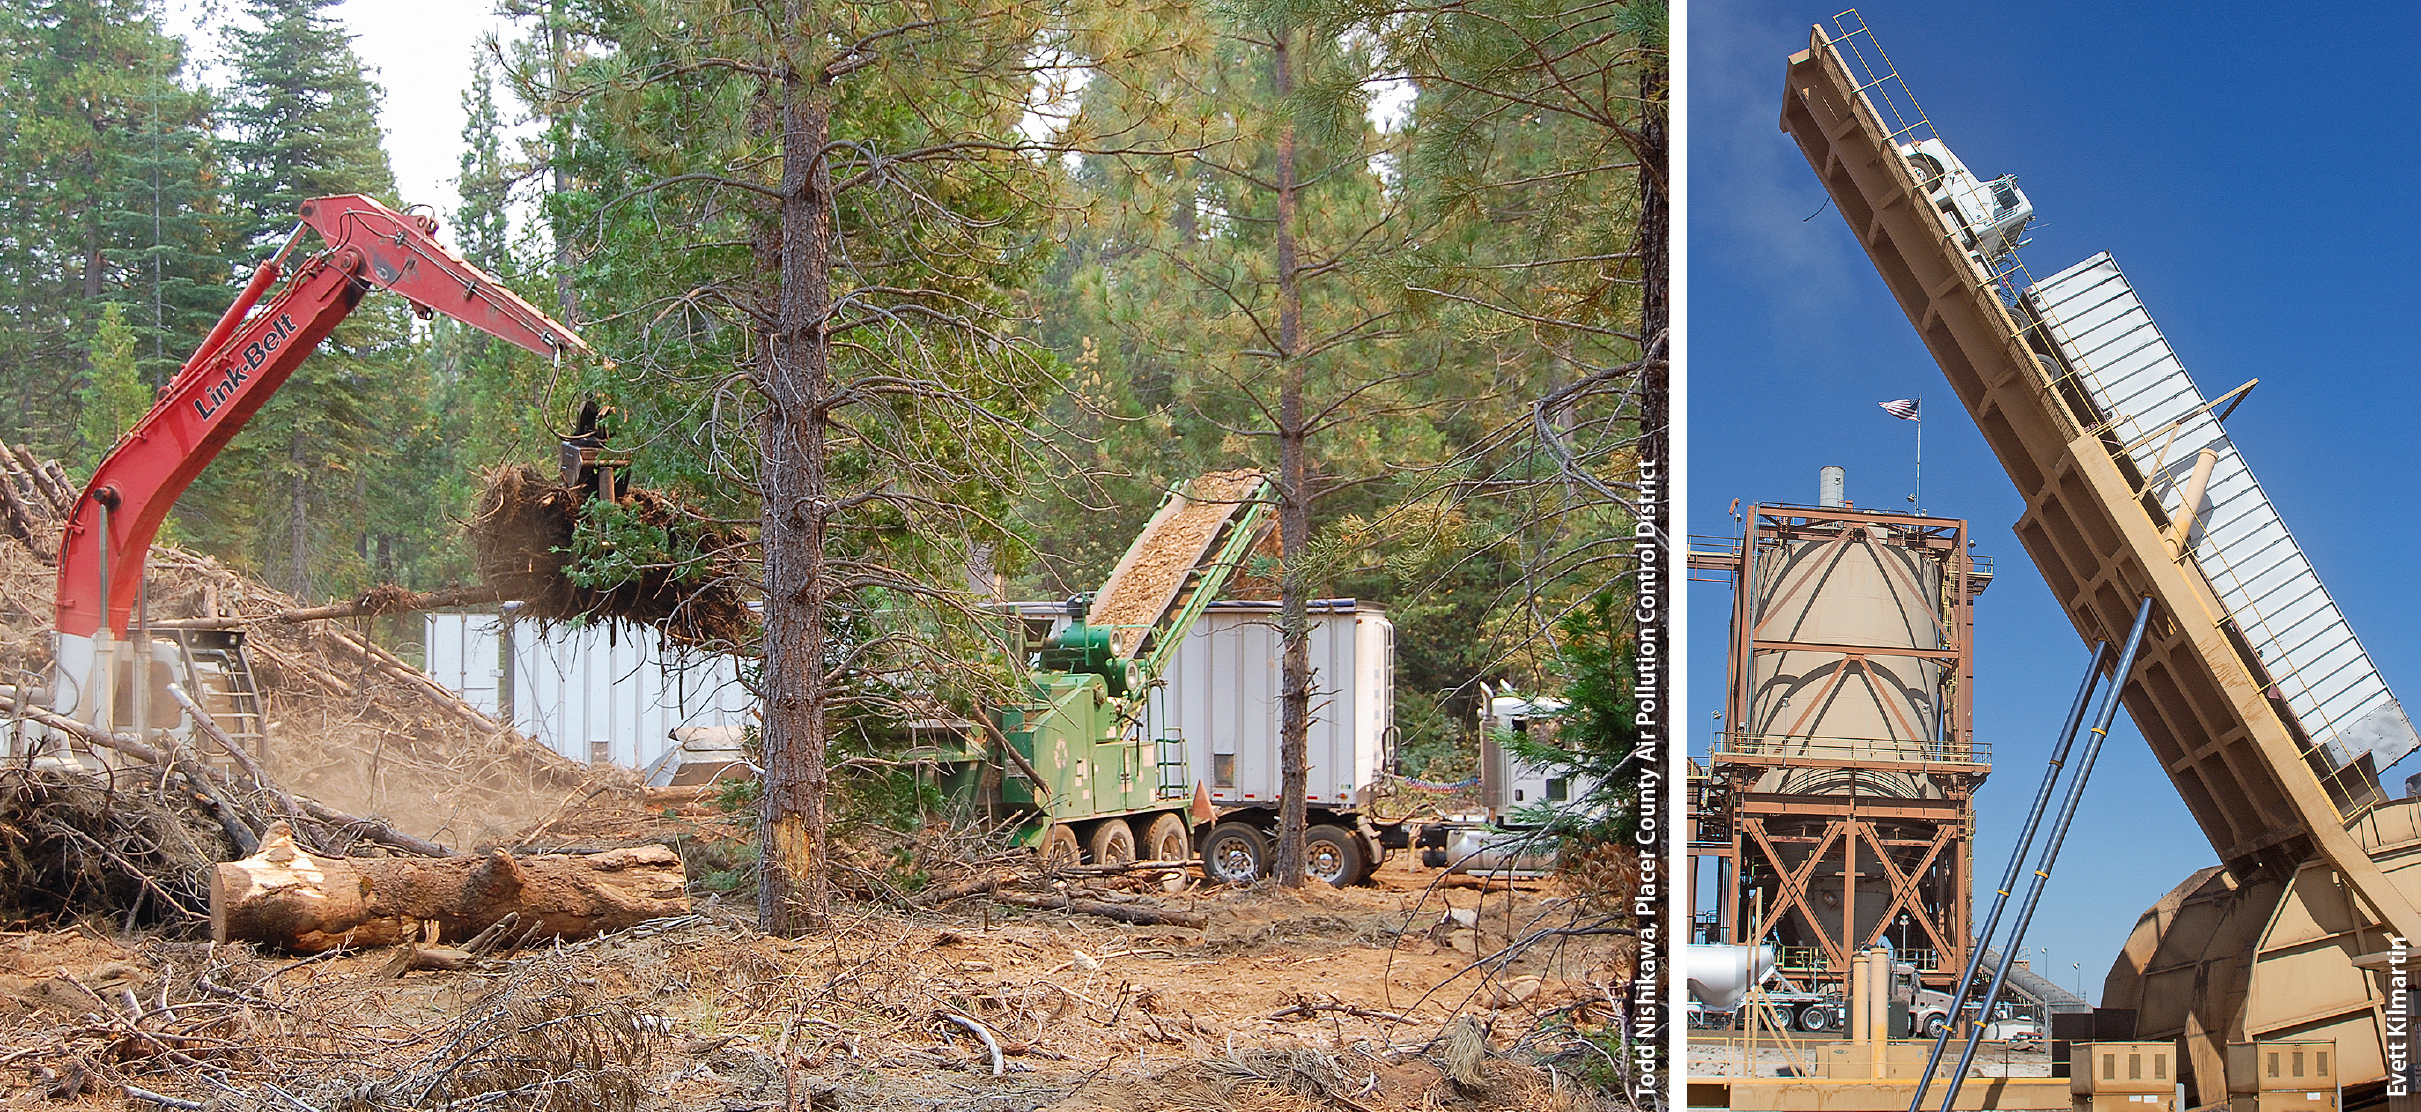 At Blodgett Forest Research Station, an excavator (left) loads forest slash into a horizontal grinder. Wood chips from the grinder are then conveyed into chip vans (center) for transport to Buena Vista Biomass Power plant (right).